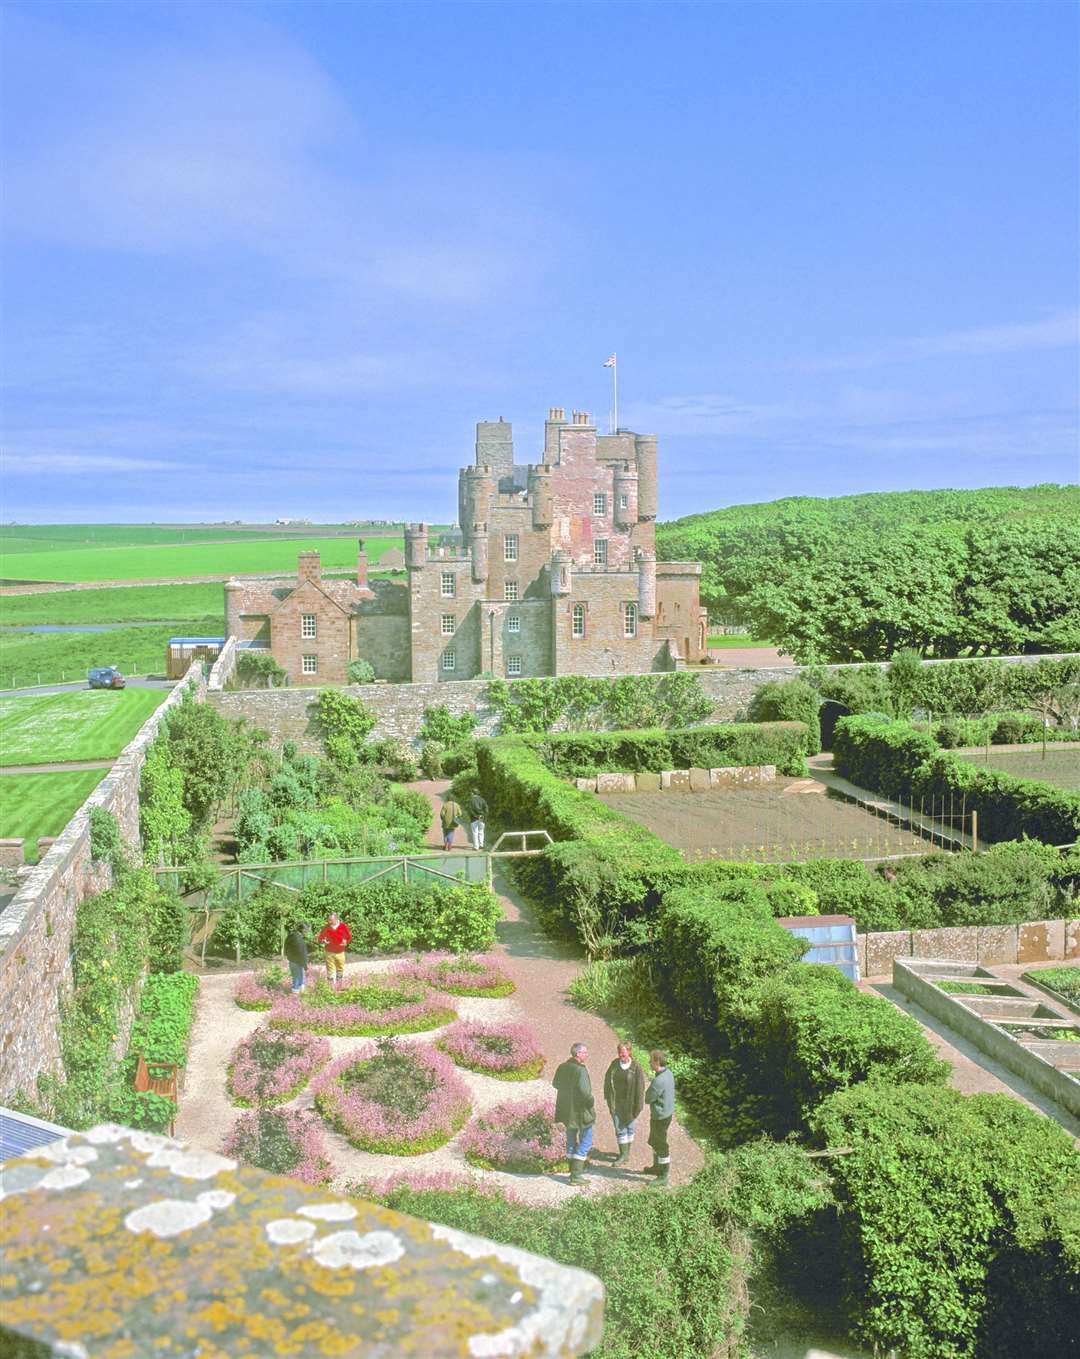 Garden Open at the Castle of Mey on August 10. Picture: Paul Tomkins/VisitScotland